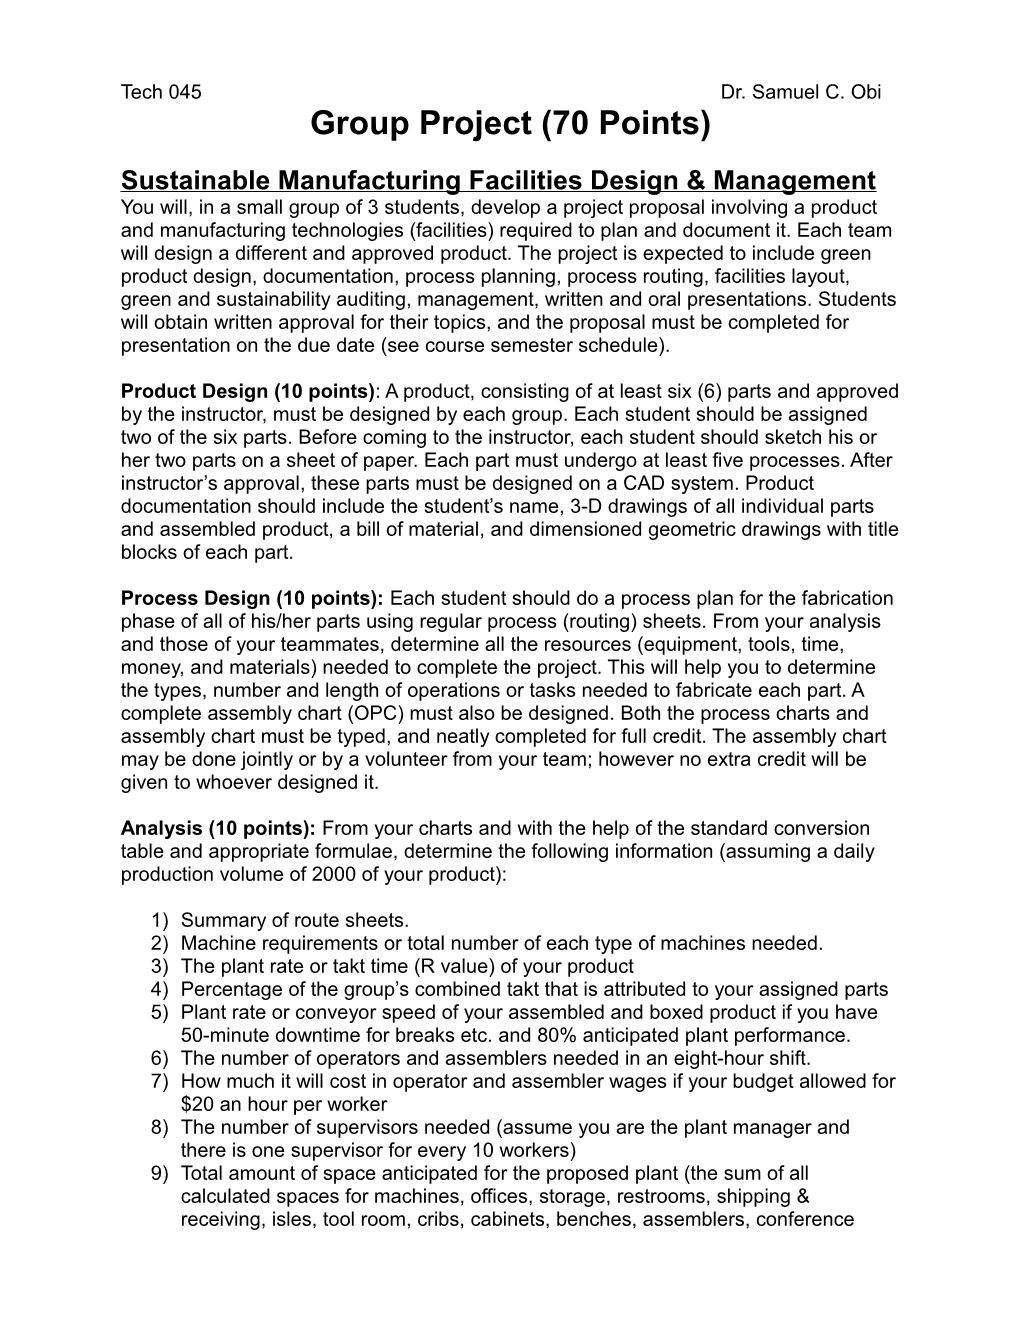 Sustainable Manufacturing Facilities Design & Management